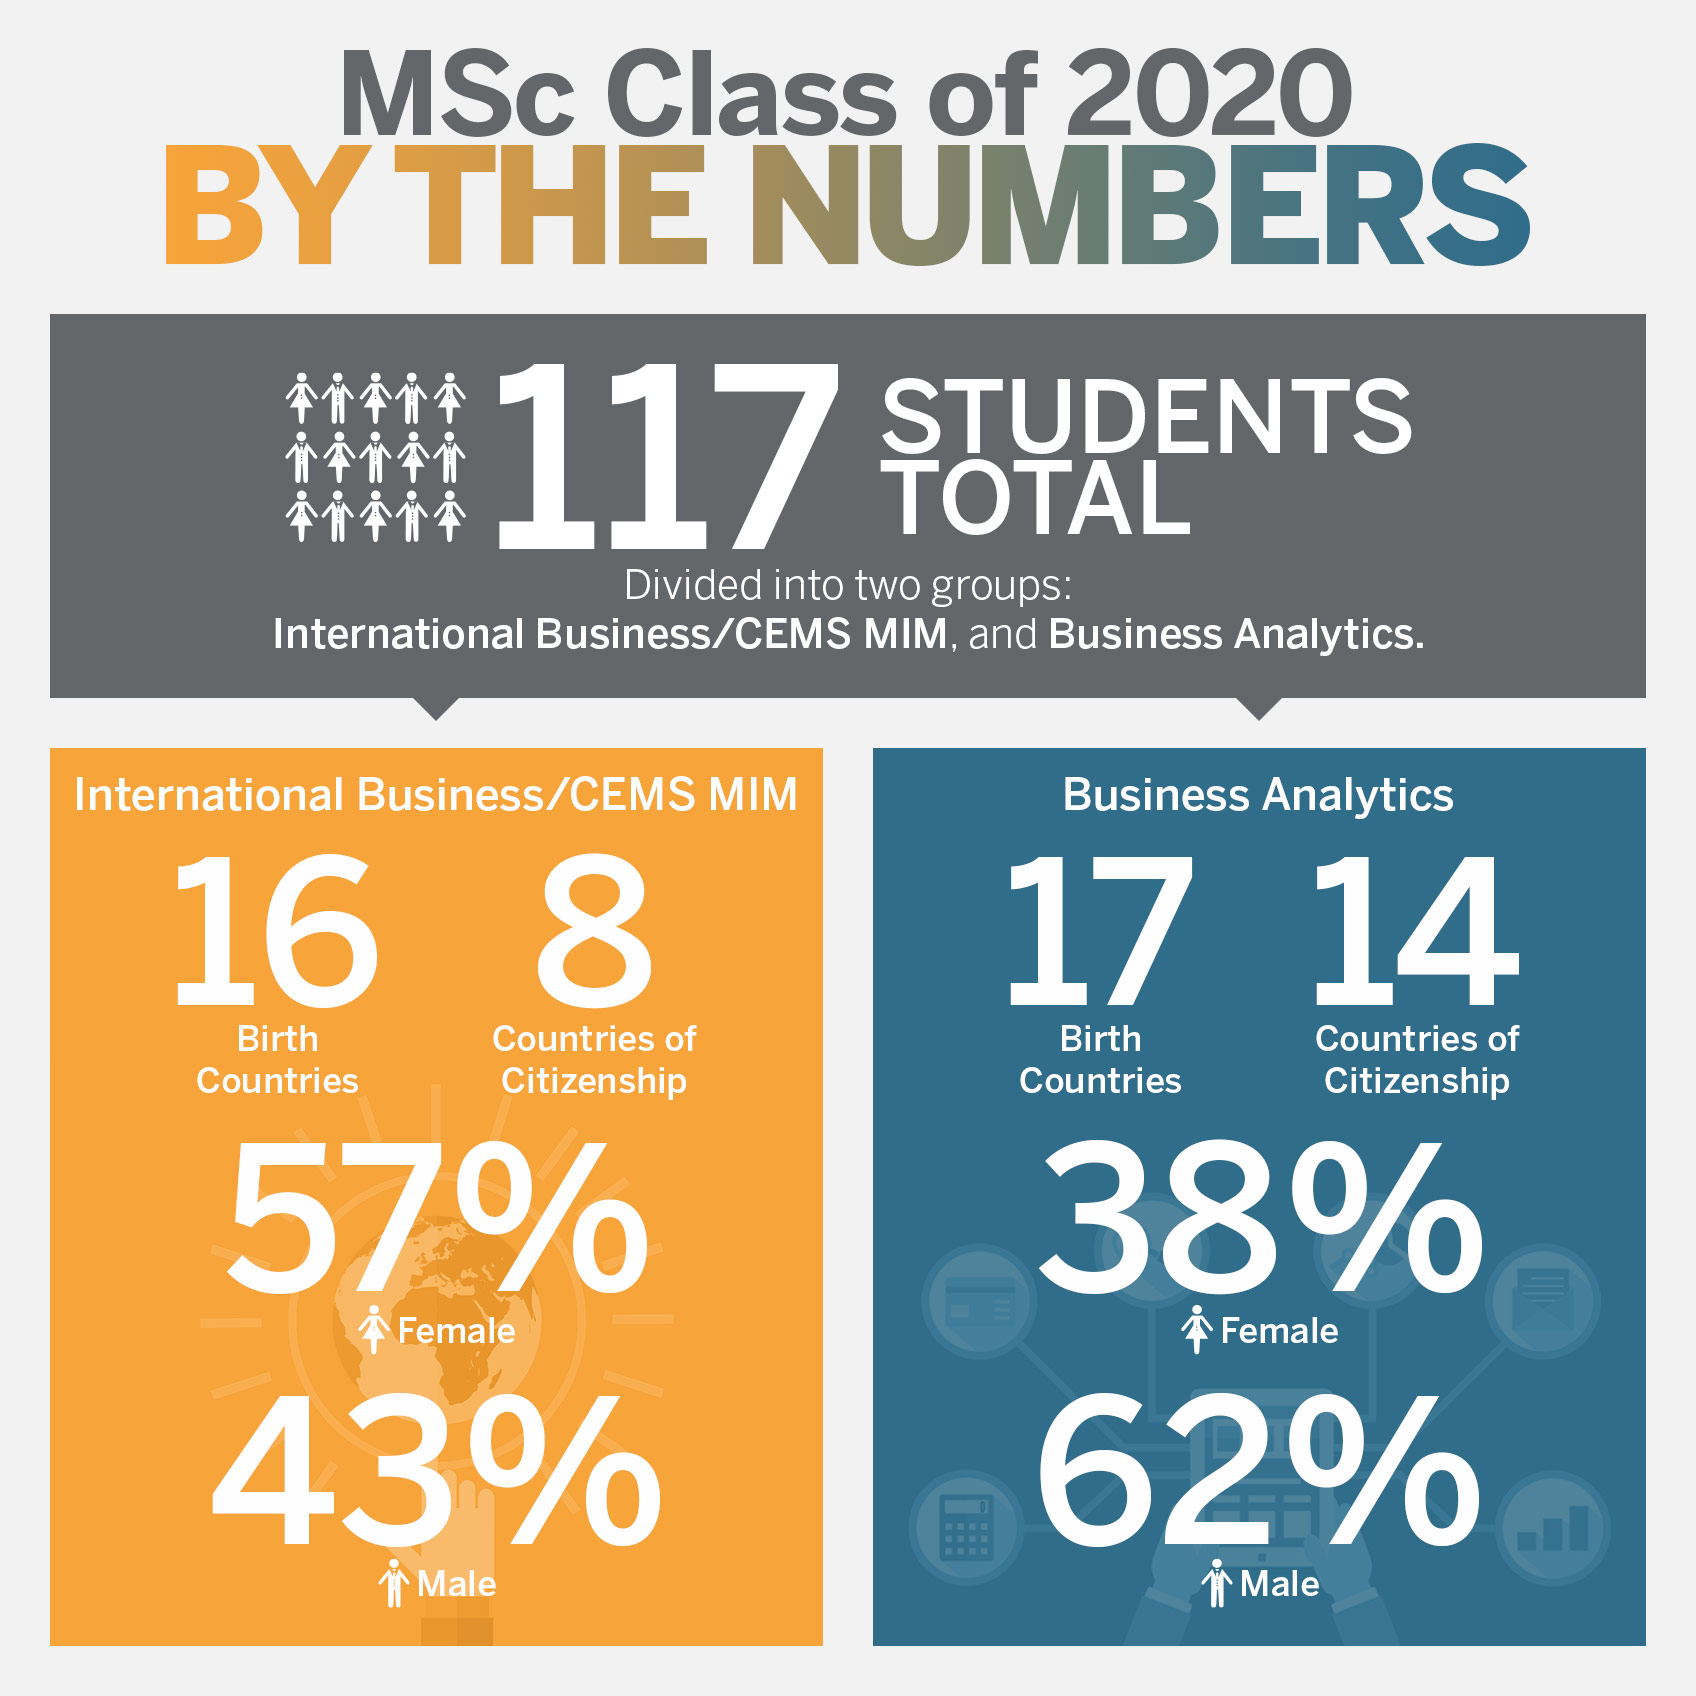 MSc Class of 2020 By the Numbers